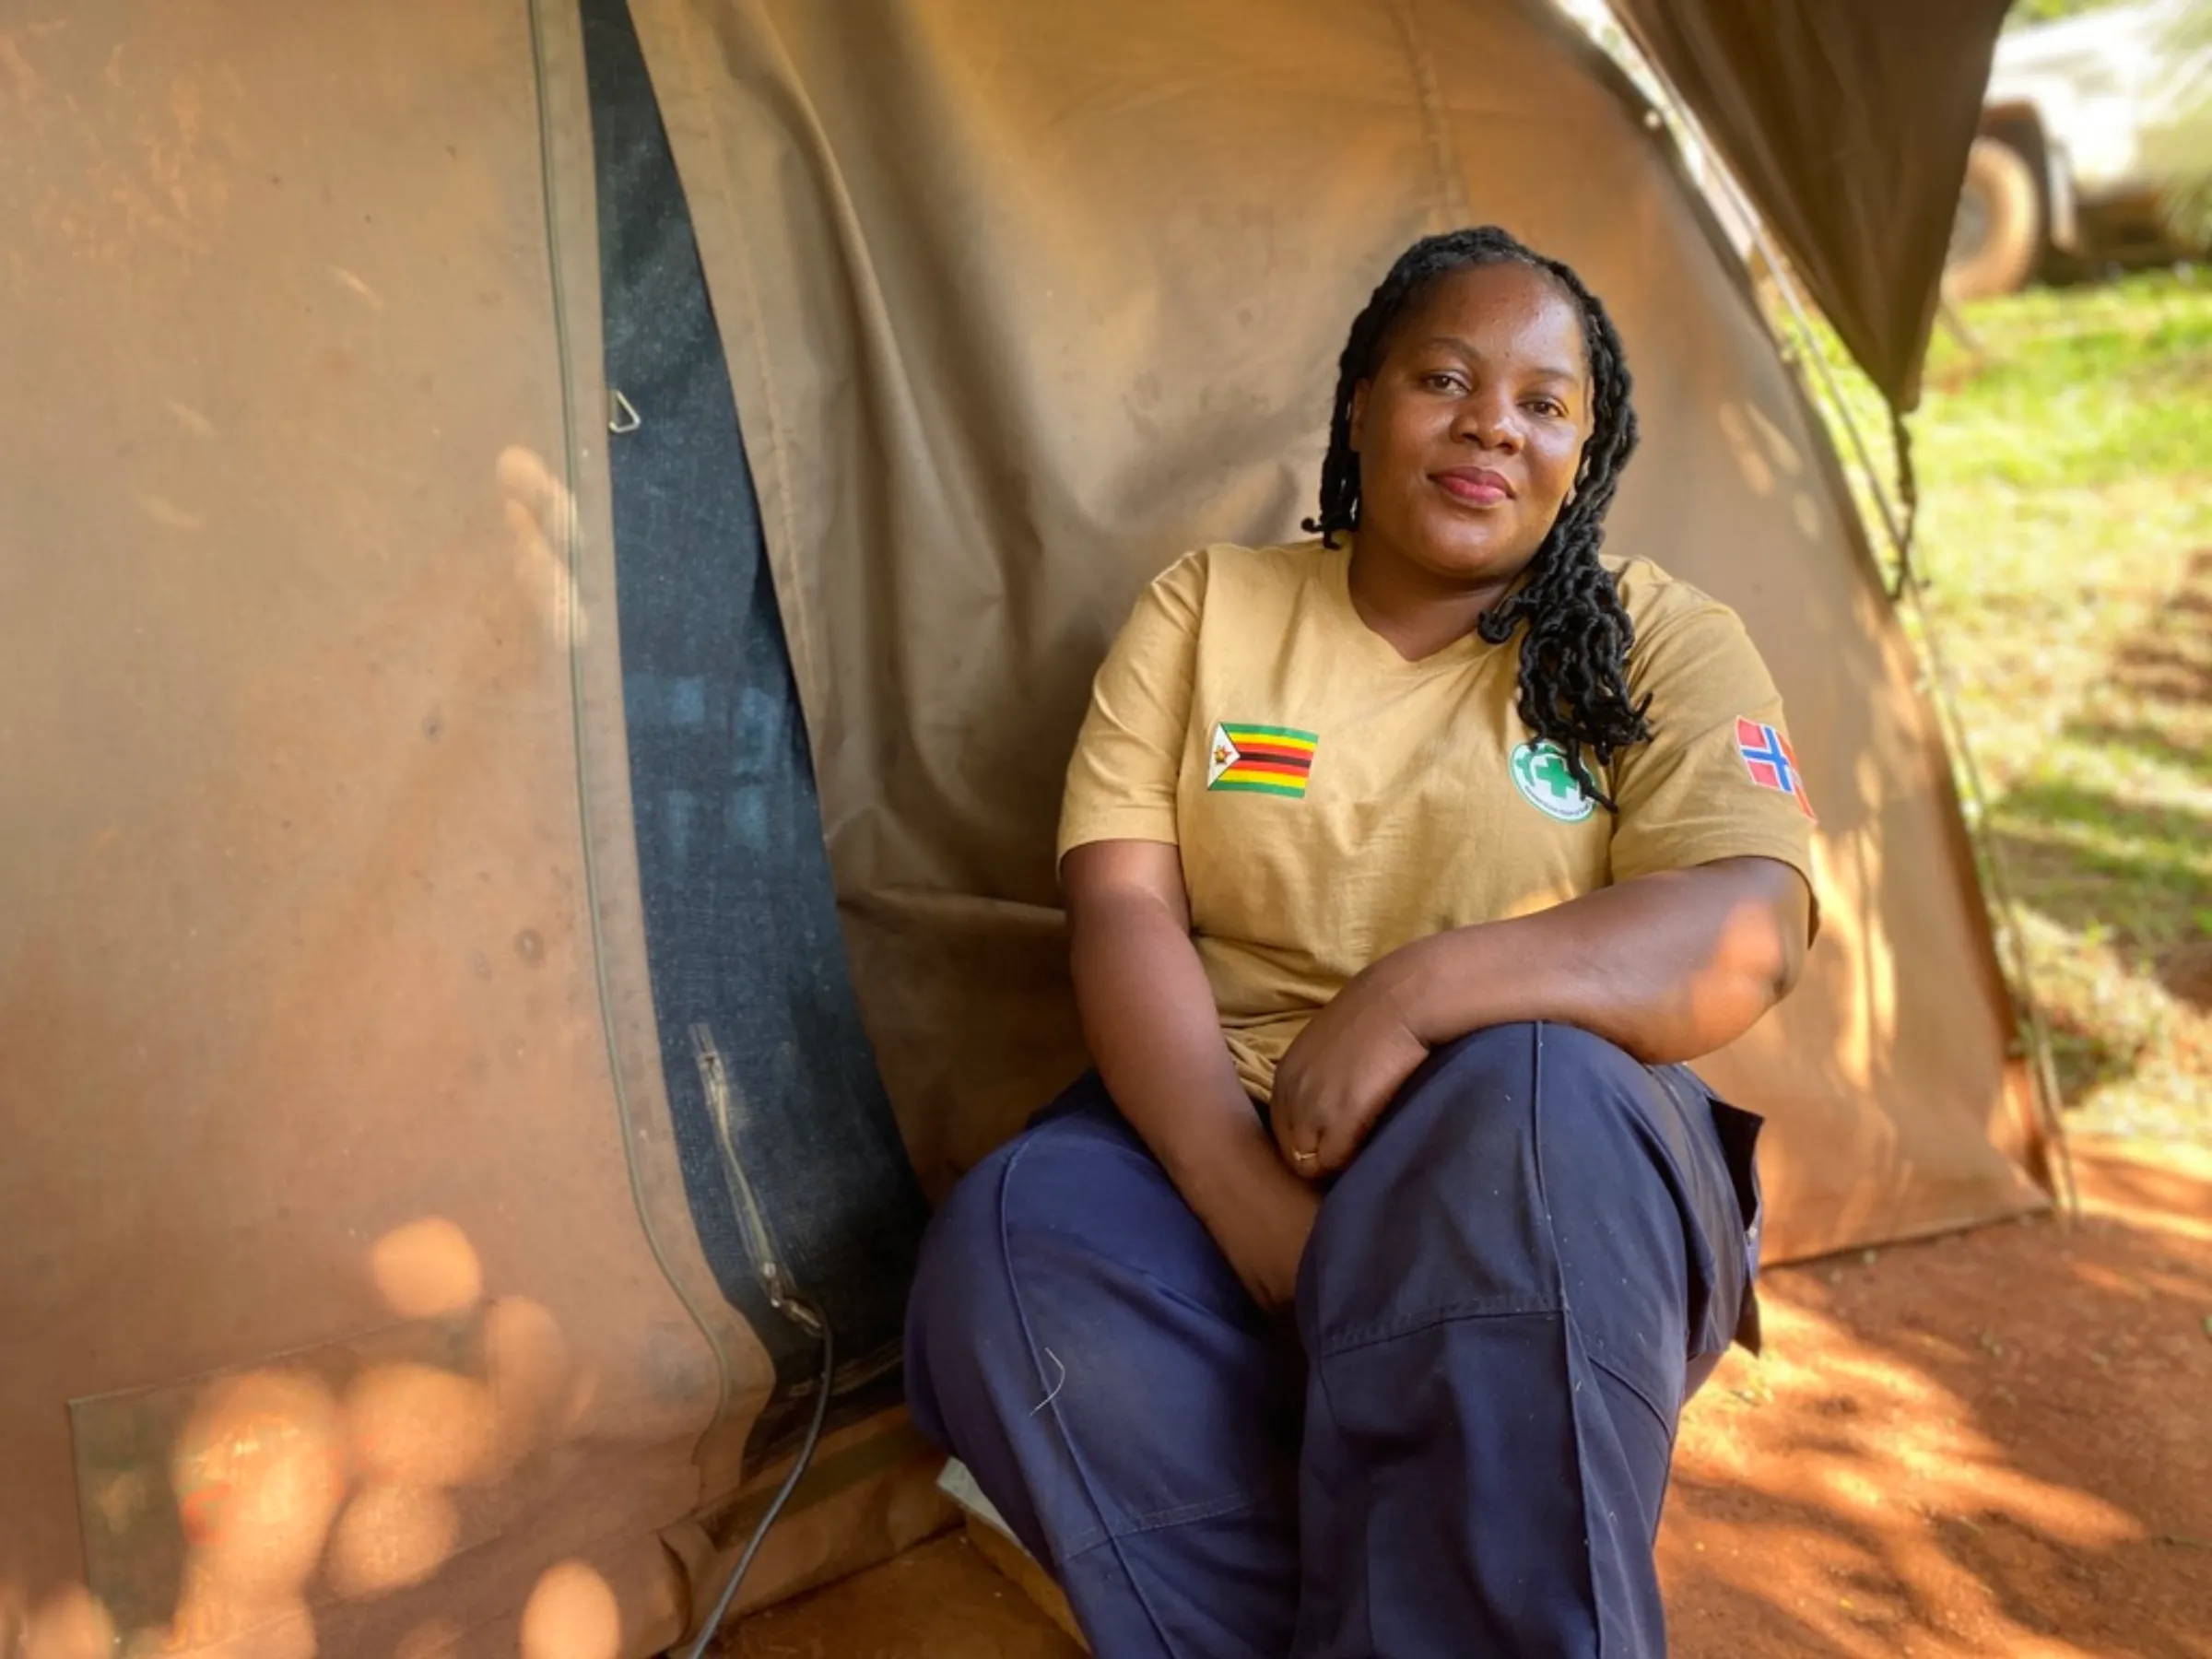 Memory Mutepfa, a female deminer, sits outside her tent in the camp in Chipinge, Zimbabwe, December 16, 2022. Thomson Reuters Foundation/Farai Shawn Matiashe